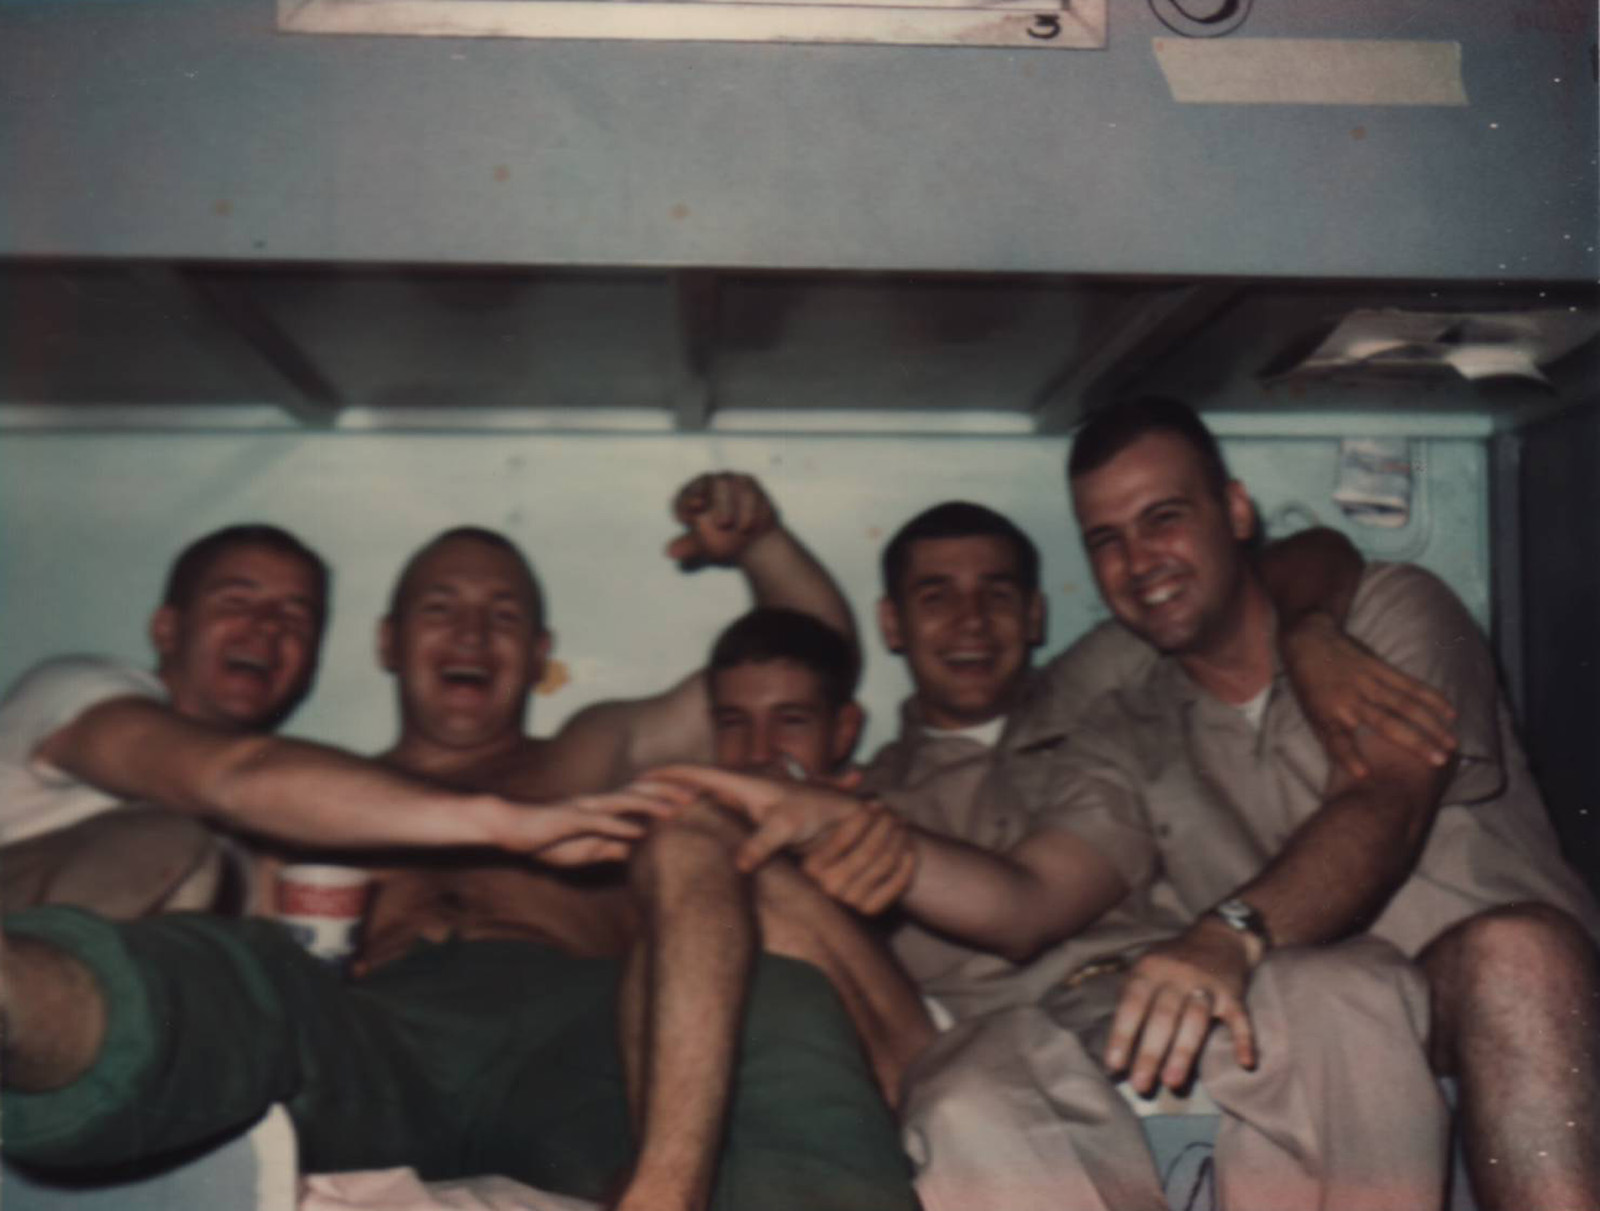 Paul in center with Rich Keenan and Vern Von Sydow to his right; and Rick Grant and Ollie Donelan to his left. The picture was taken aboard the USS Kearsarge during Paul's 1966 deployment flying search and rescue missions in Vietnam.